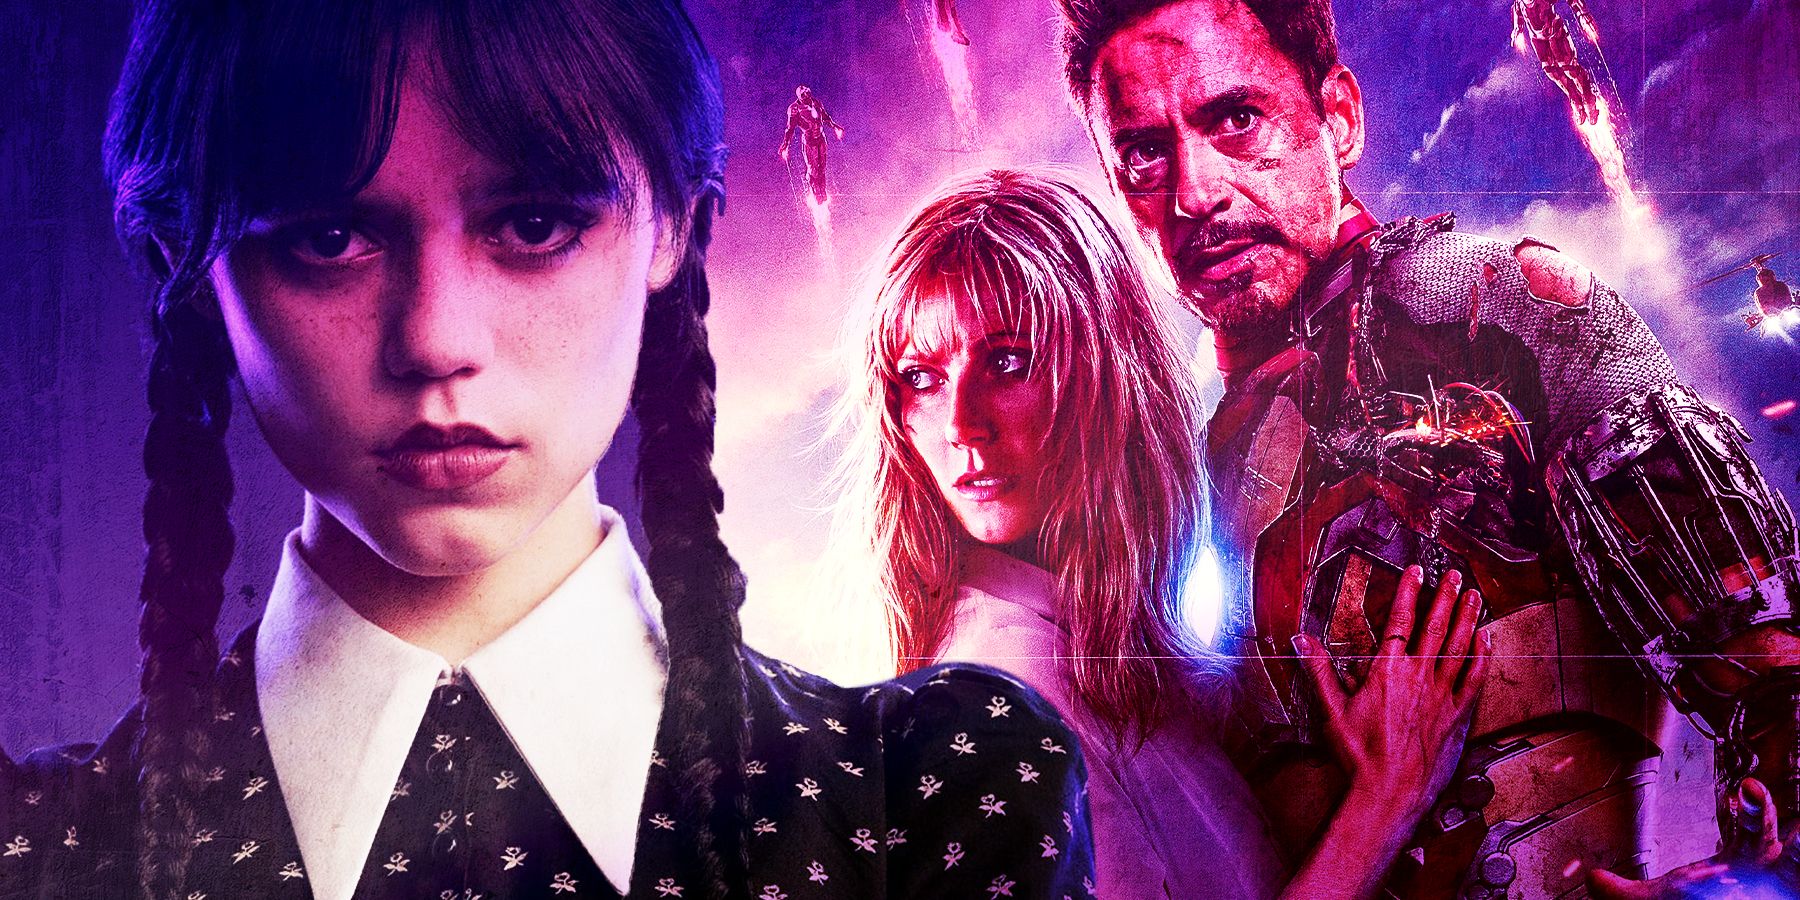 Hollywood's Newest Scream Queen Played a Major Role in the MCU